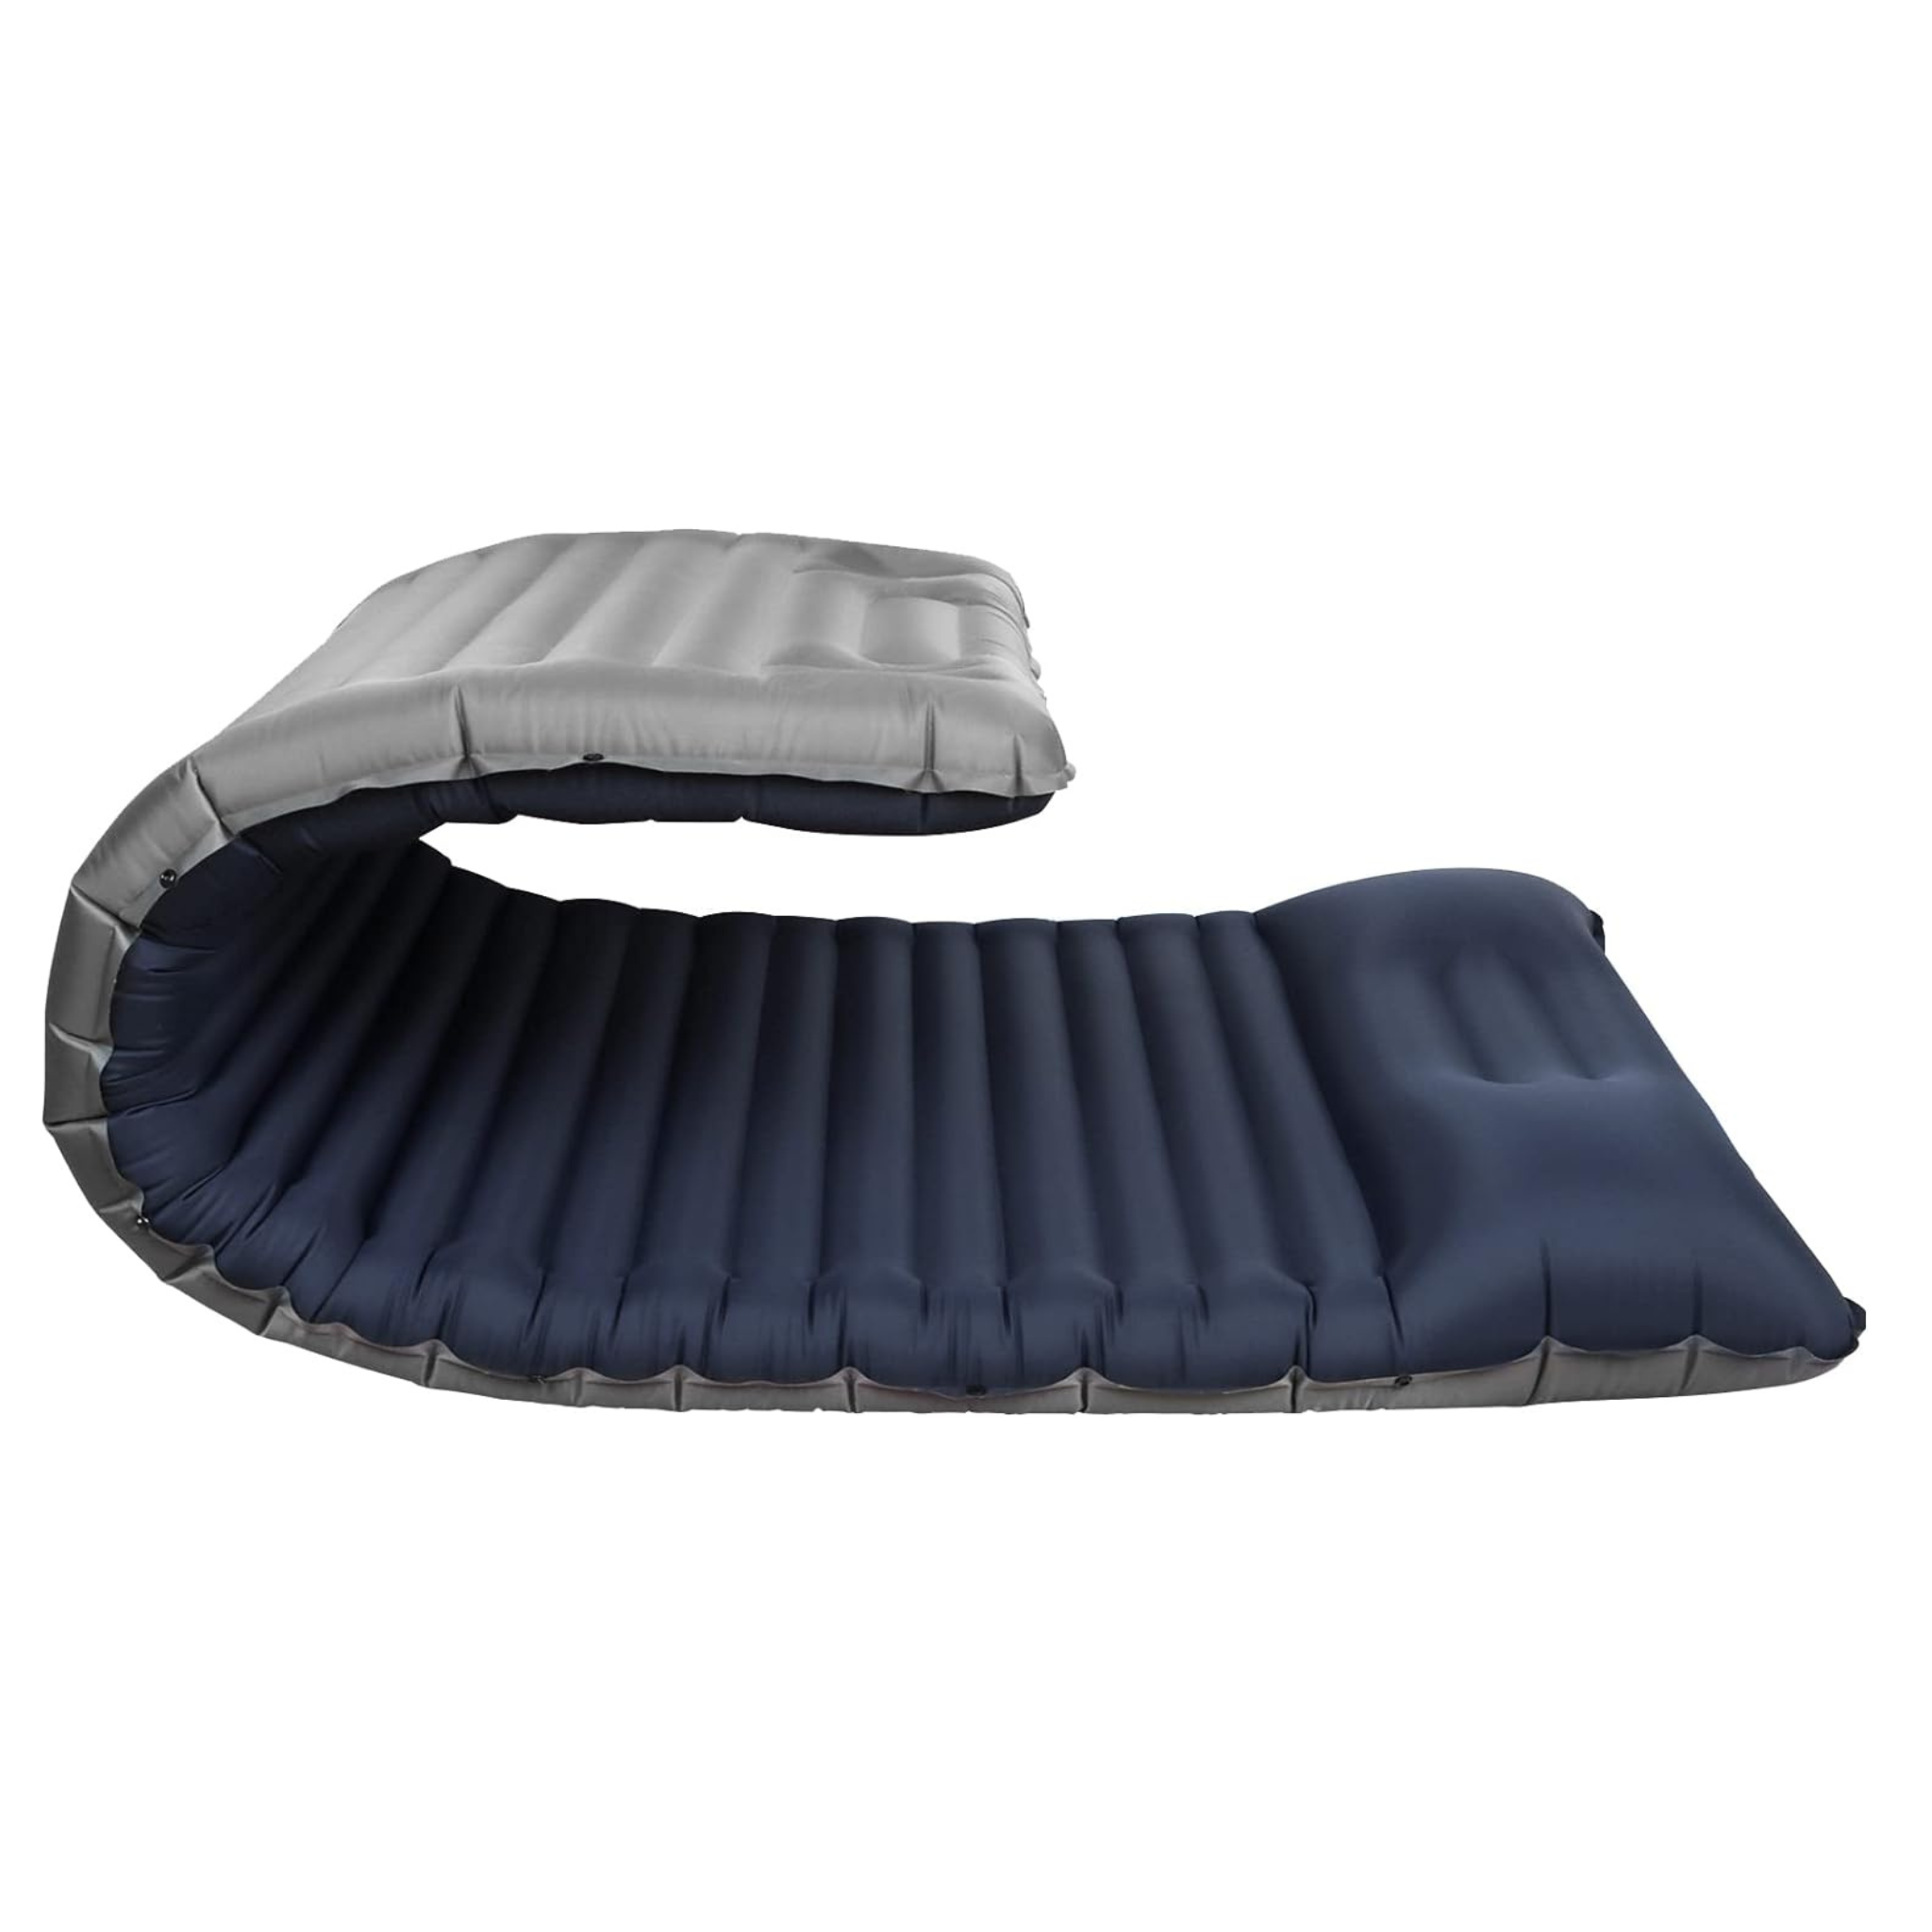 Inflatable Sleeping Pad with Pillow